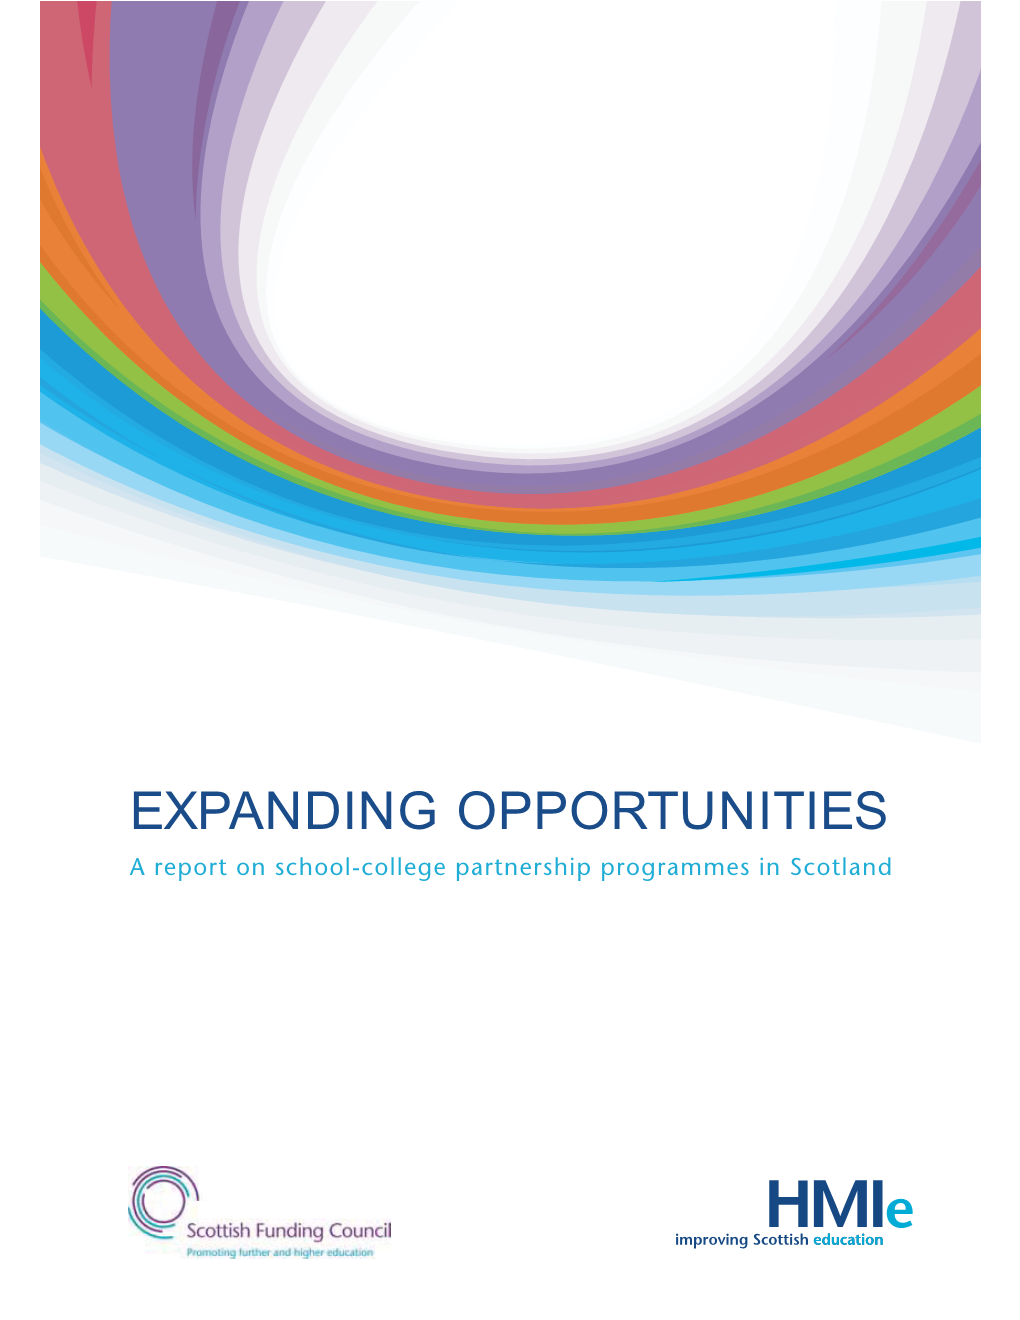 EXPANDING OPPORTUNITIES a Report on School-College Partnership Programmes in Scotland